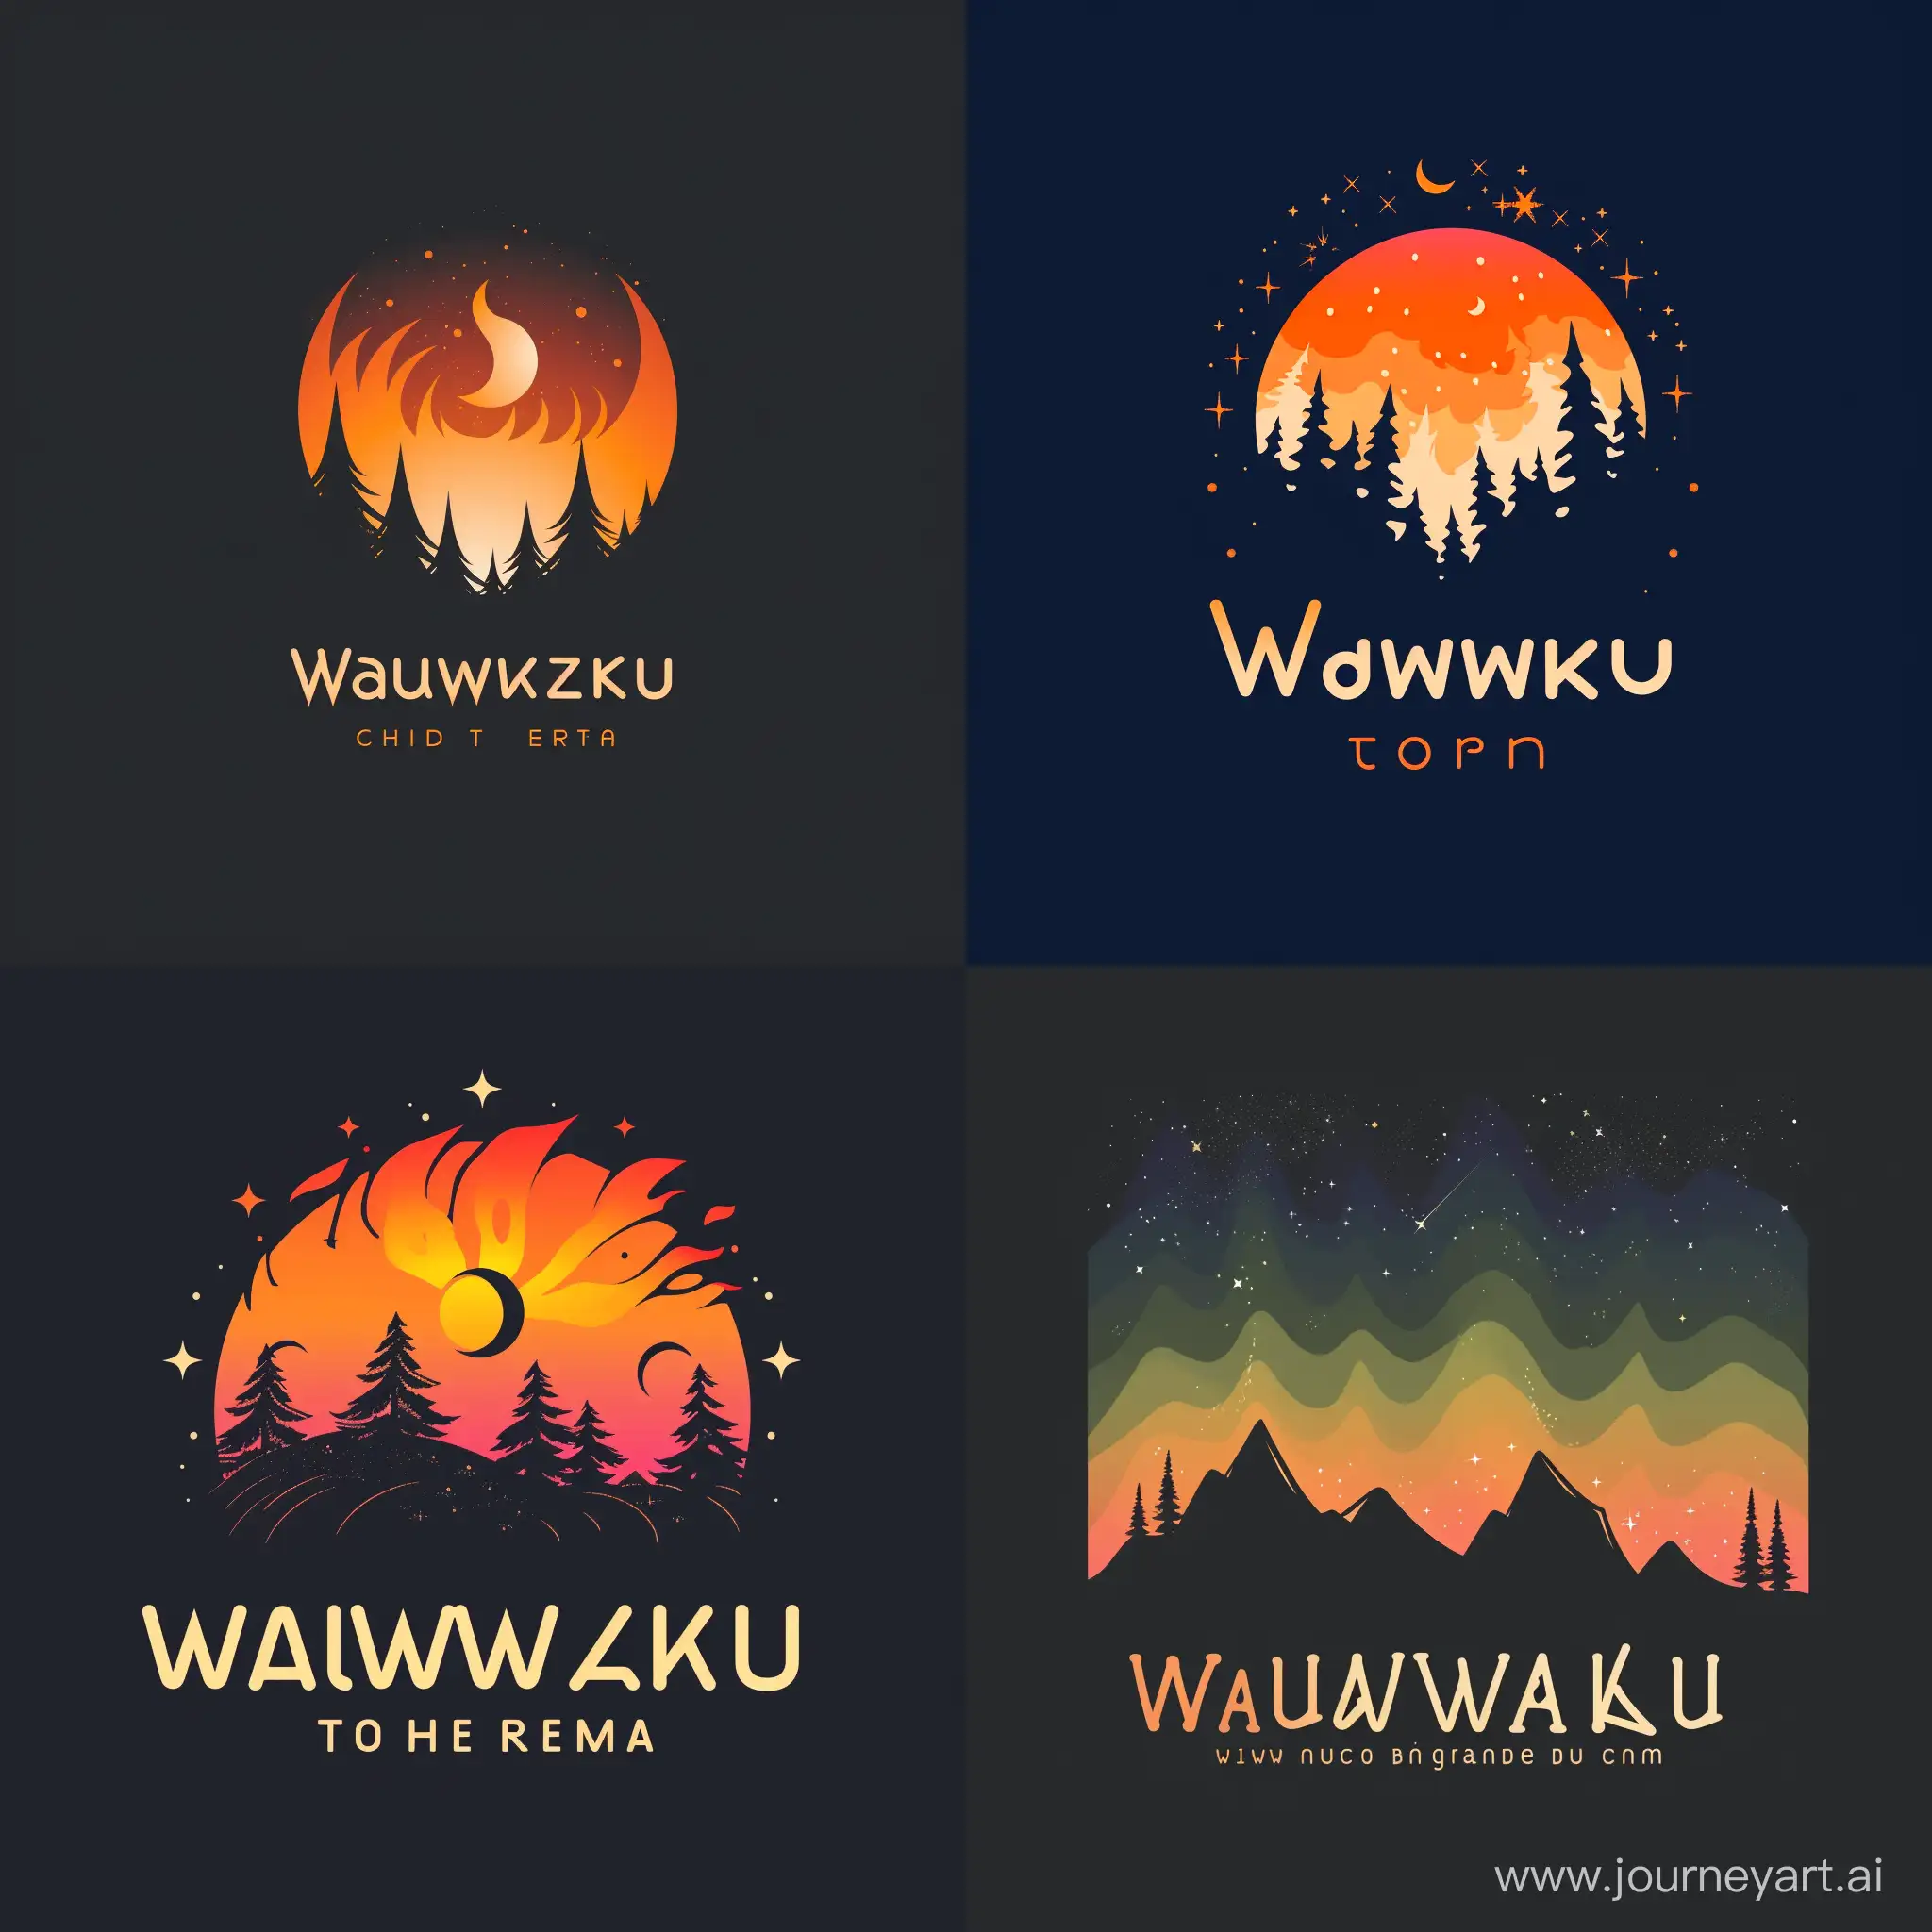 "Wakuwaku" is my company name, please help me put it in my logo, please make sure to highlight my company name. I like warm colors and the colors of aurora and starry sky. I hope the logo can bring a warm feeling to people. I hope my logo style has an elegant and ethereal feel.